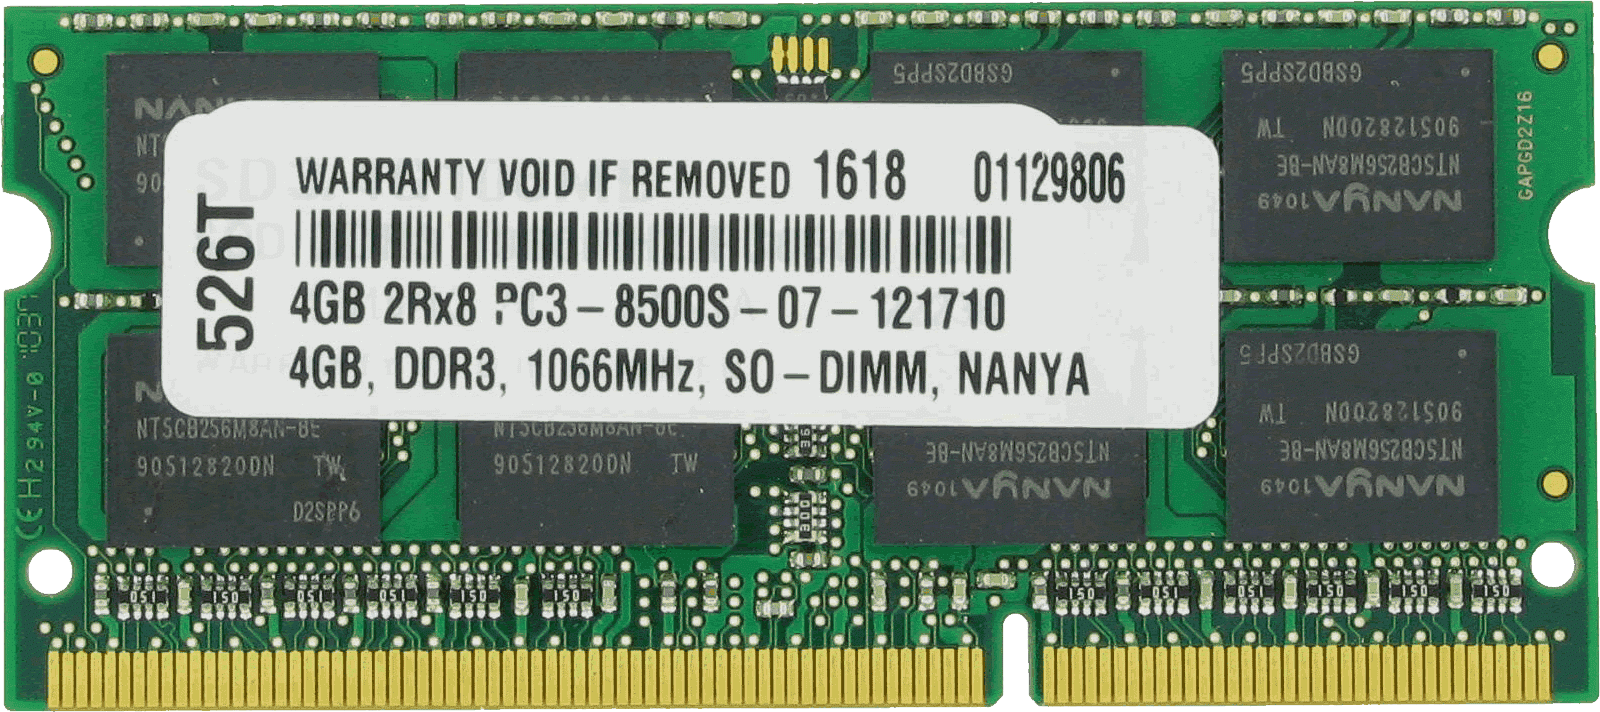 DDR3 1066MHz PC3-8500 1Rx8 1.5V SODIMM 204-Pin Memory Module A-Tech 1GB RAM Replacement for Micron MT8JSF12864HY-1G1